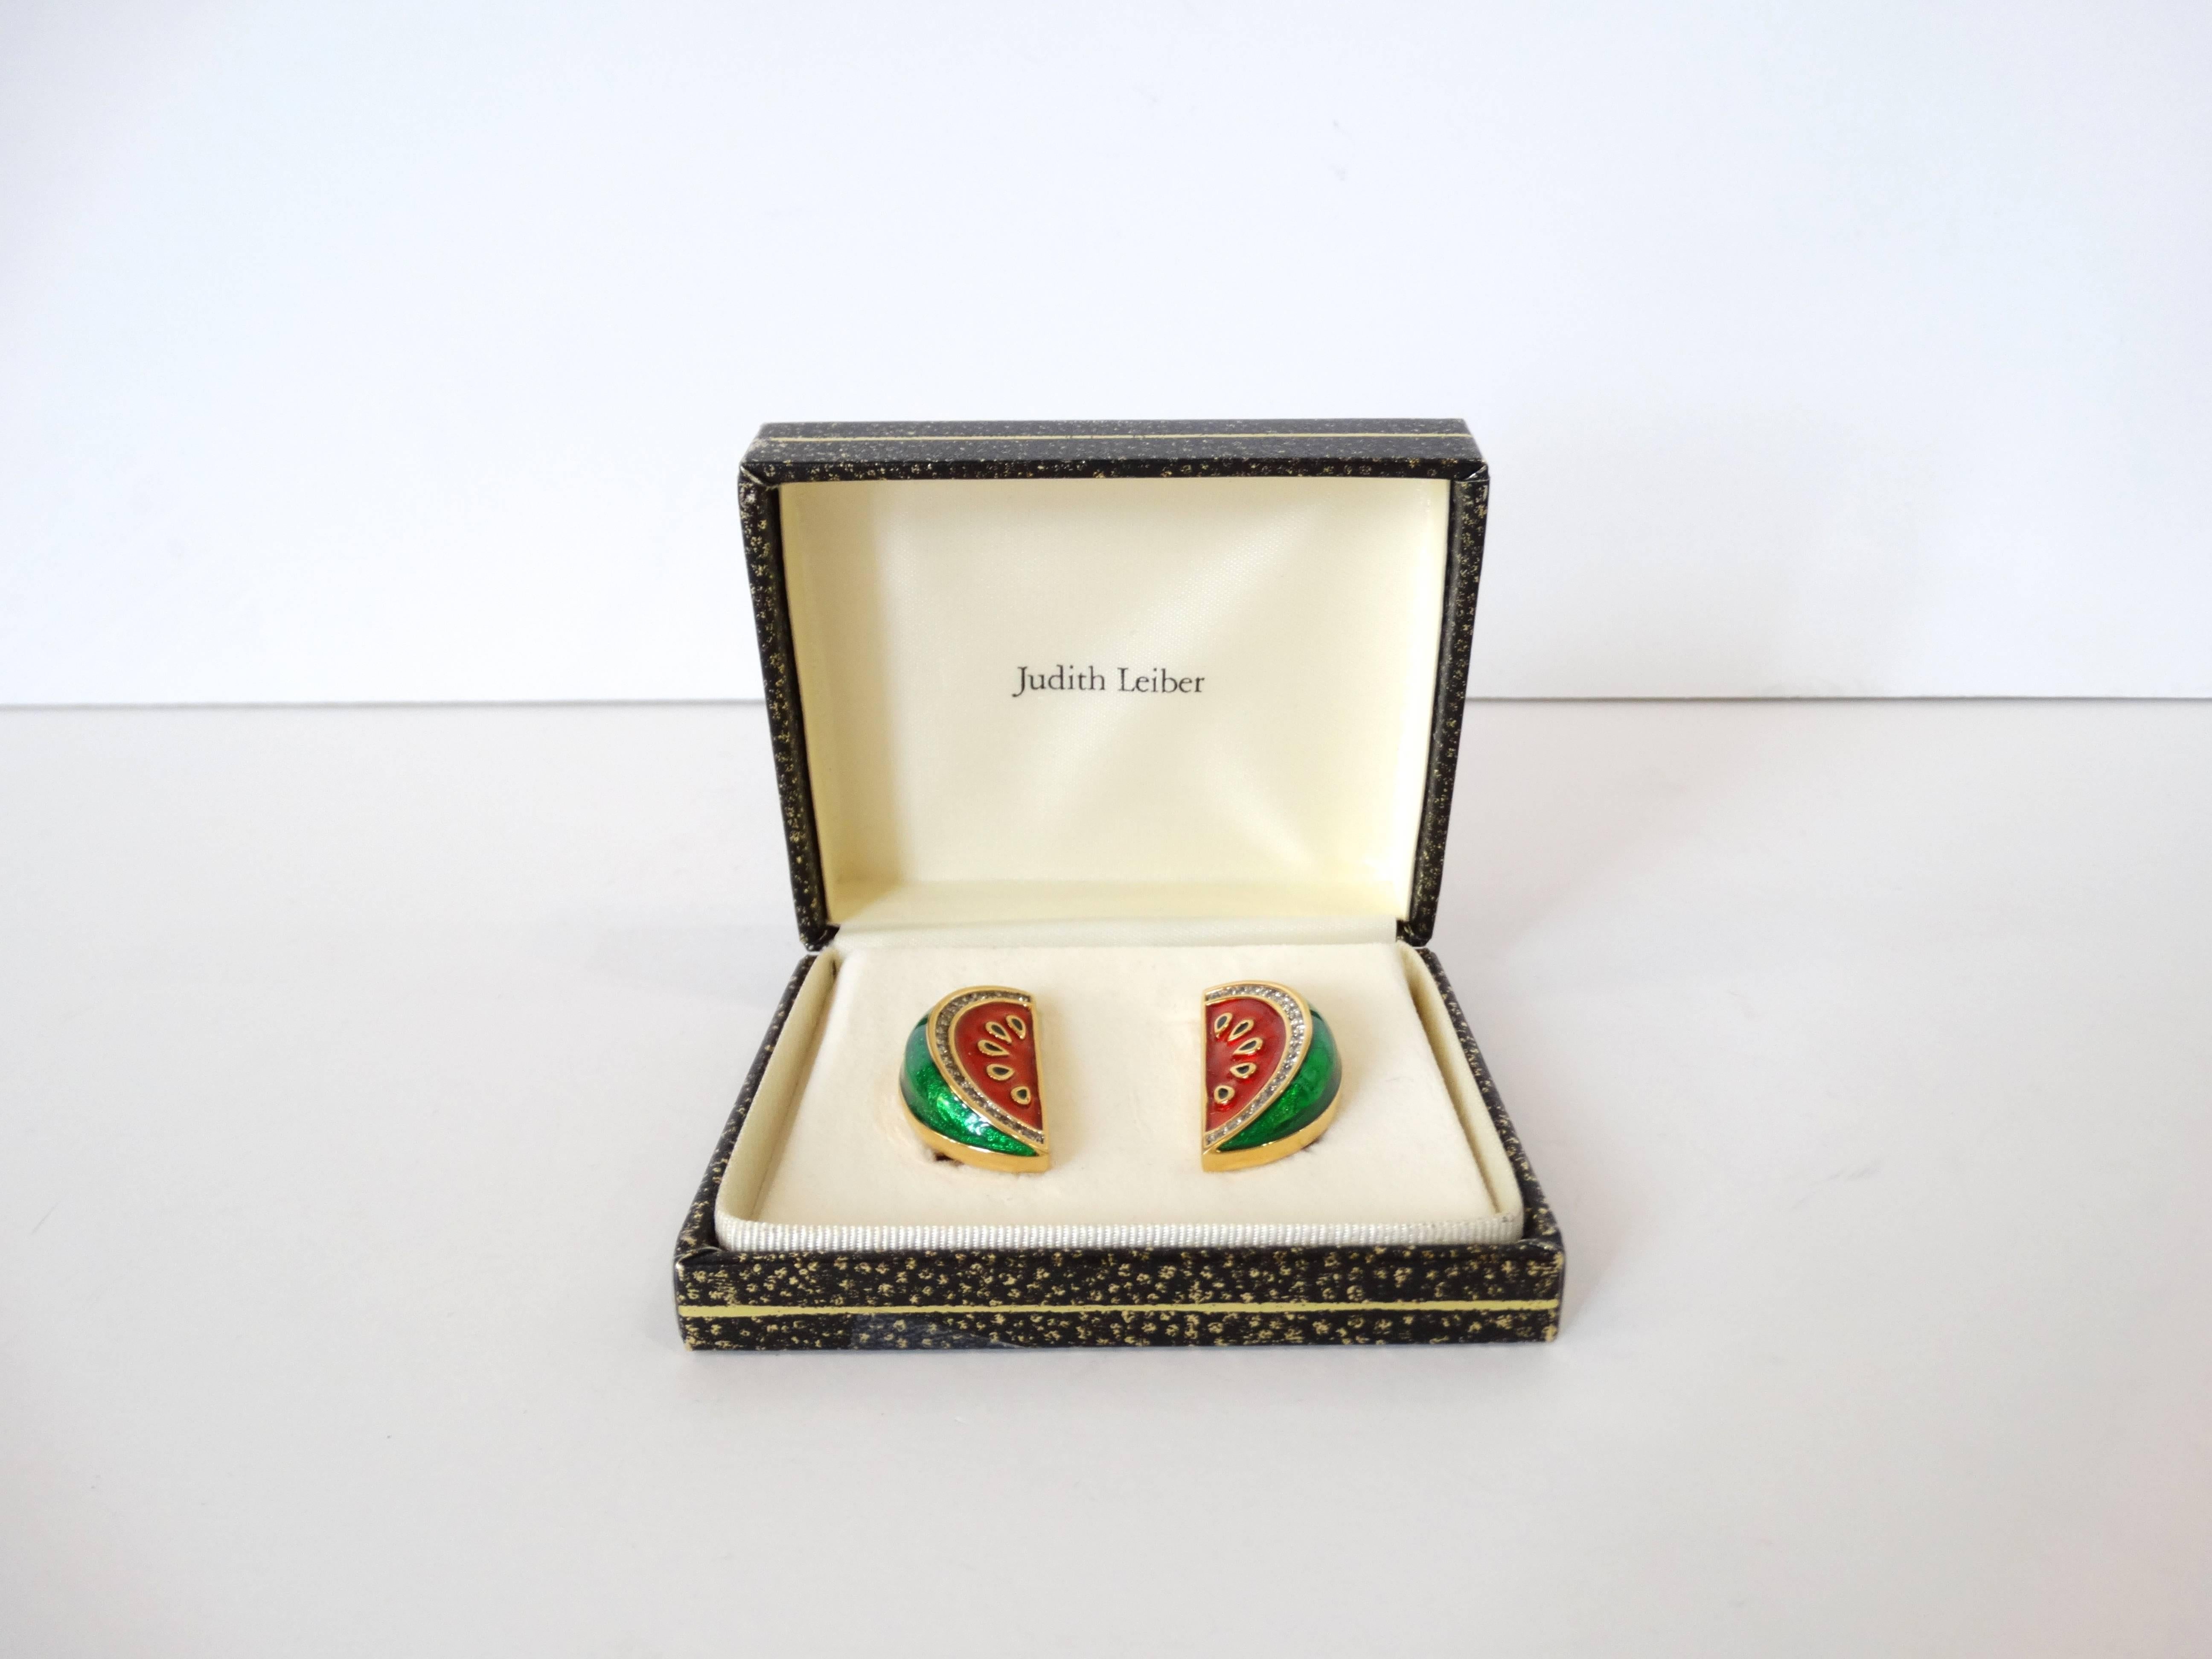 Adorable pair of Judith Leiber watermelon earrings! Gold metal with red and green enamel- accented with crystals along the rind. Clip on backs. Signed at the back. Comes with original box. 